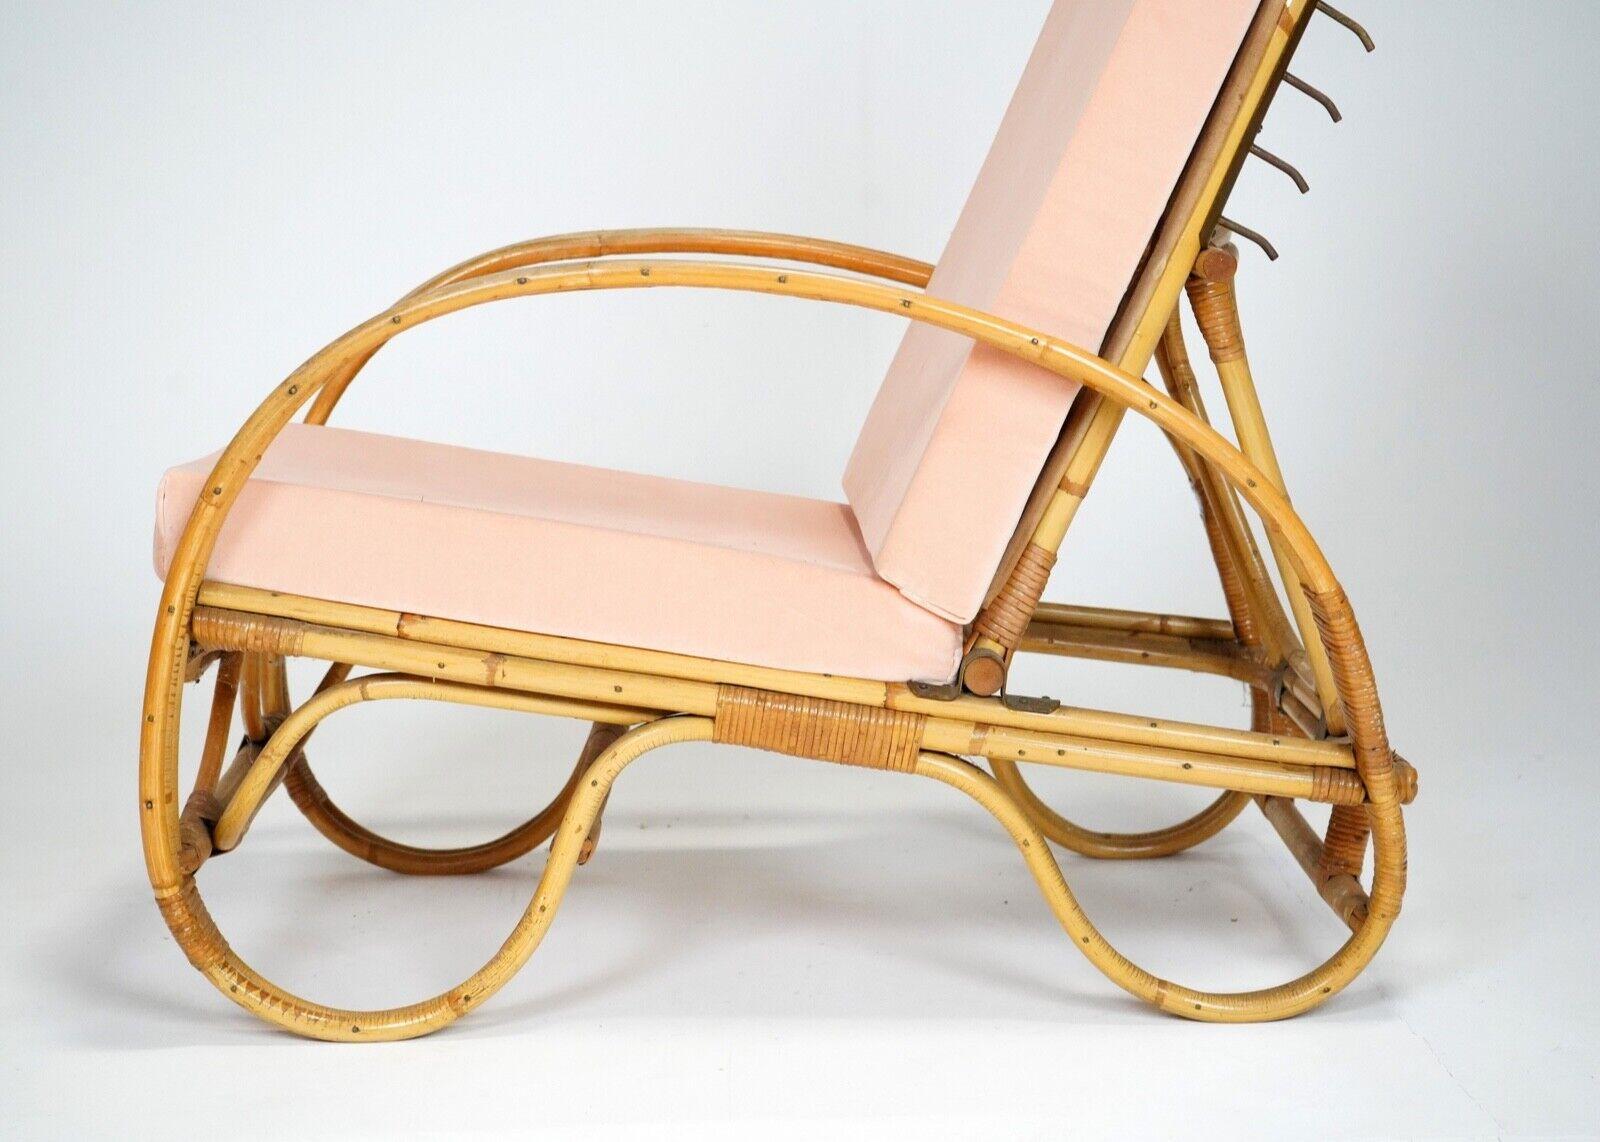 Wicker Sun Lounge Chair by Angraves - Cane Rattan Armchair 1